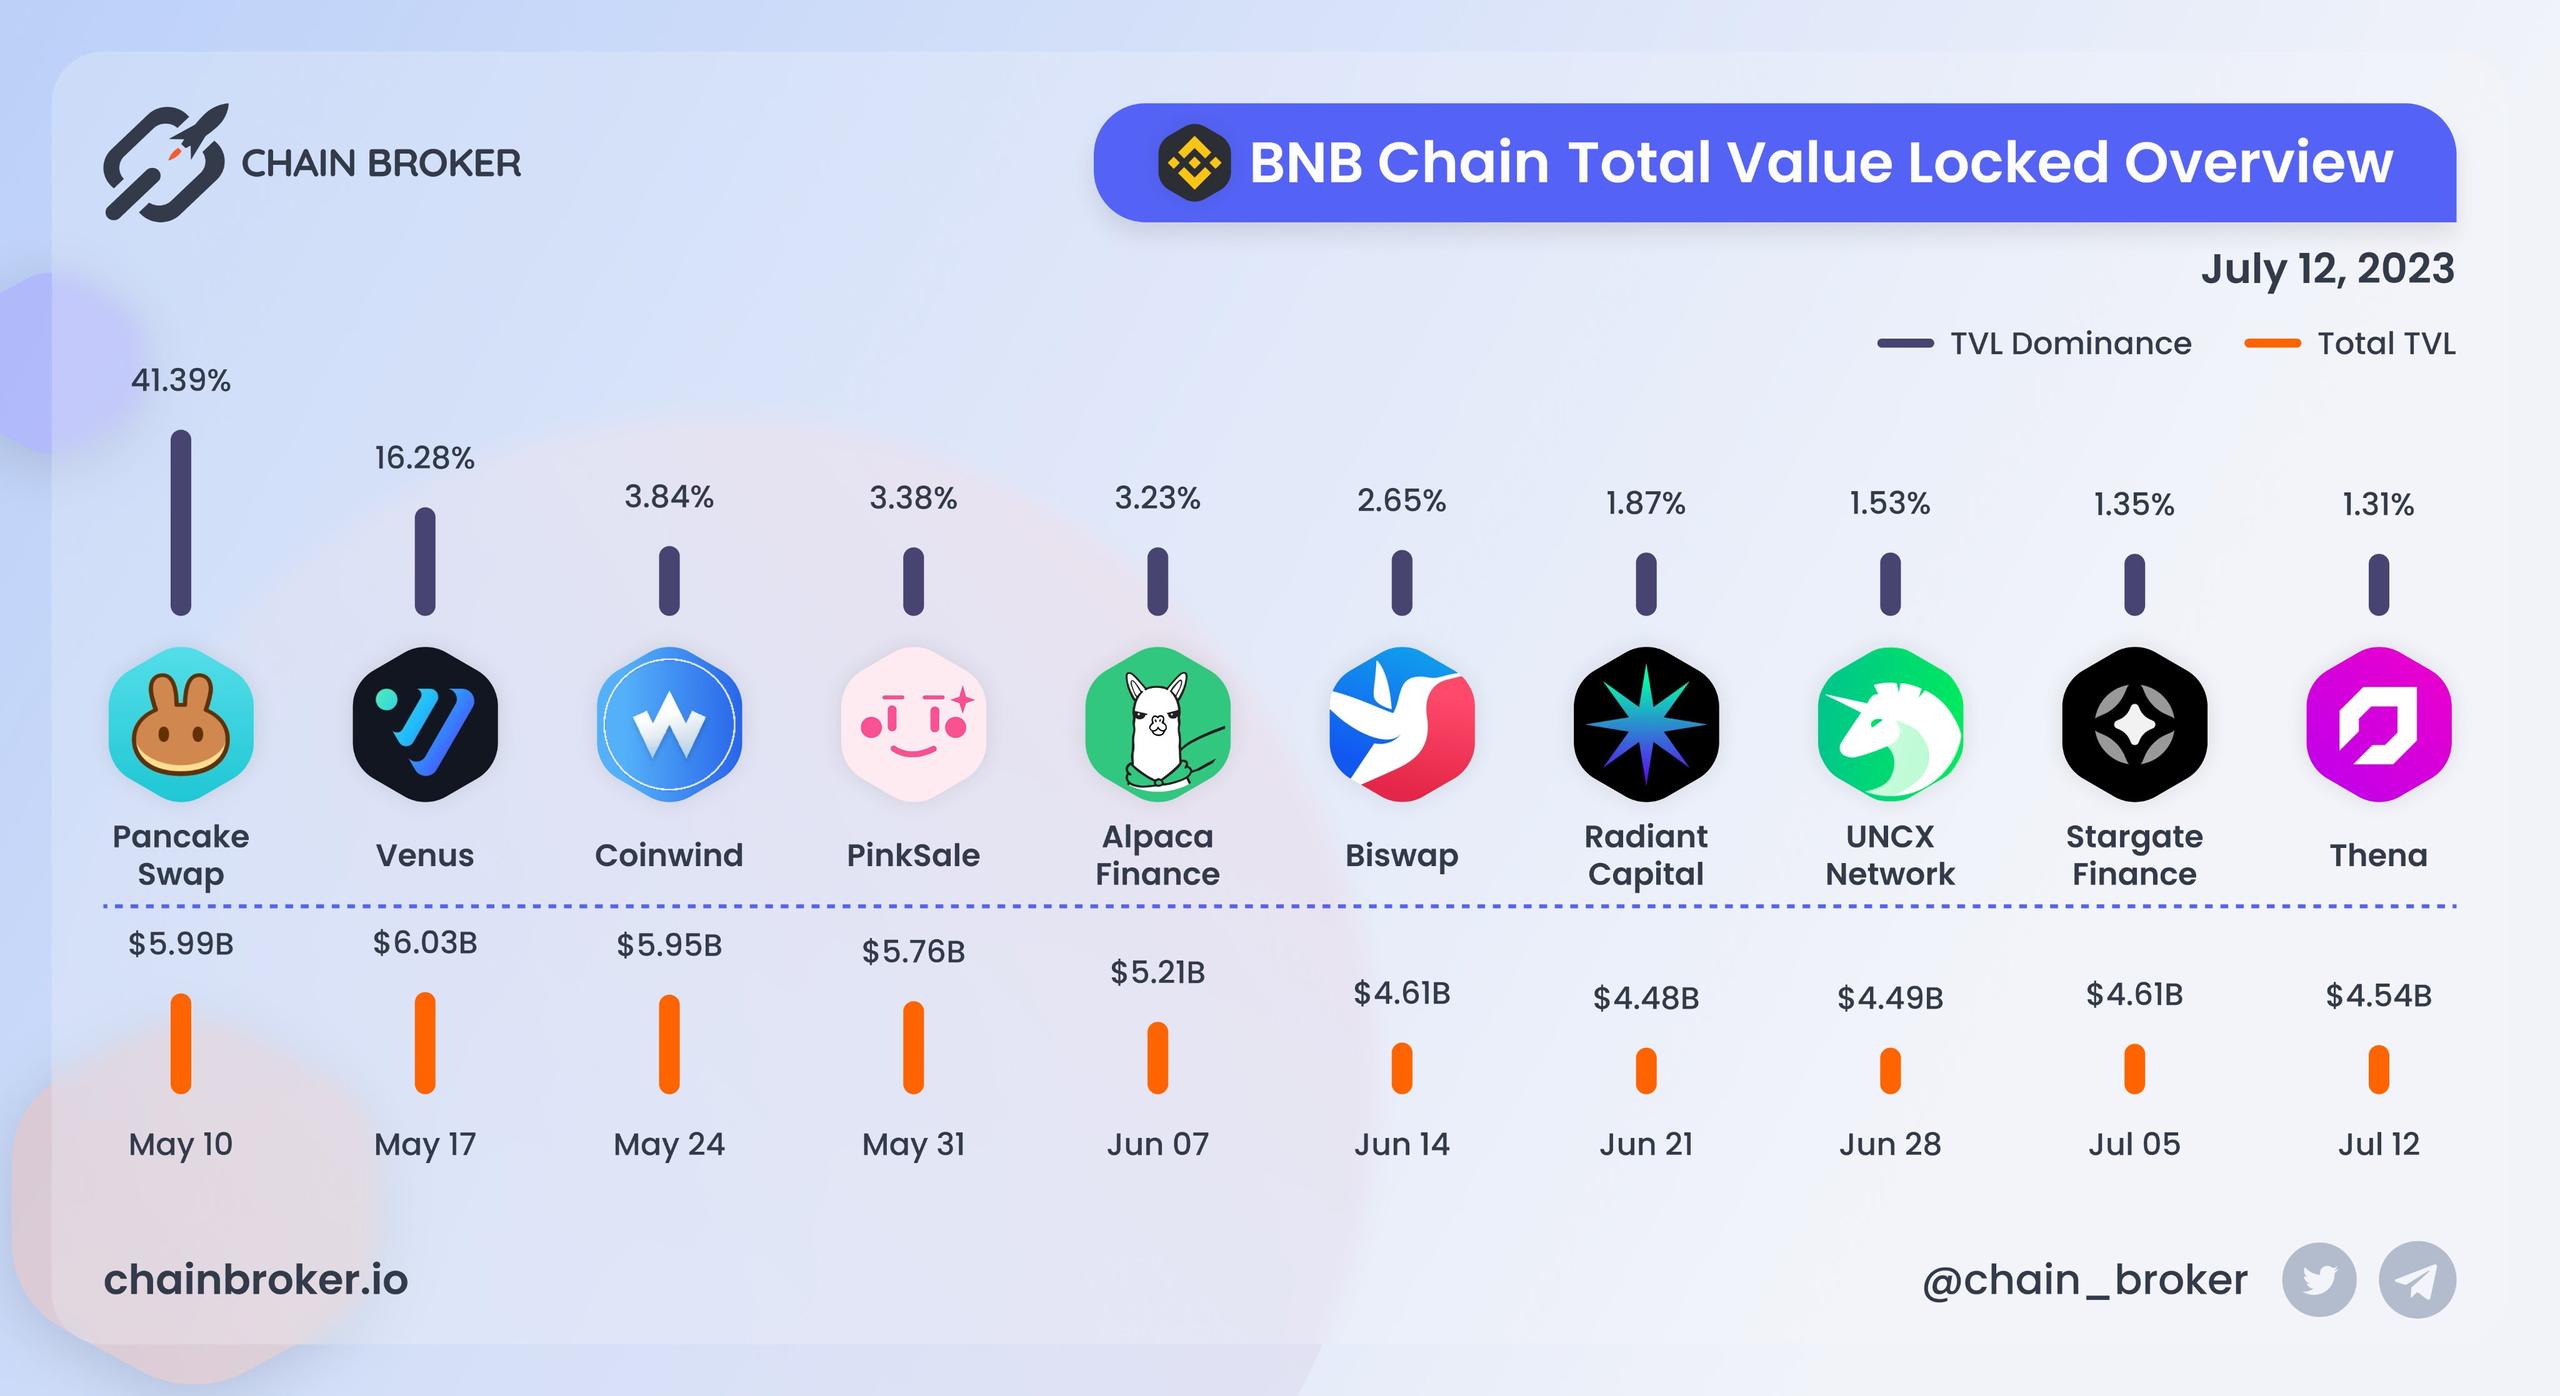 BNB Chain total value locked overview